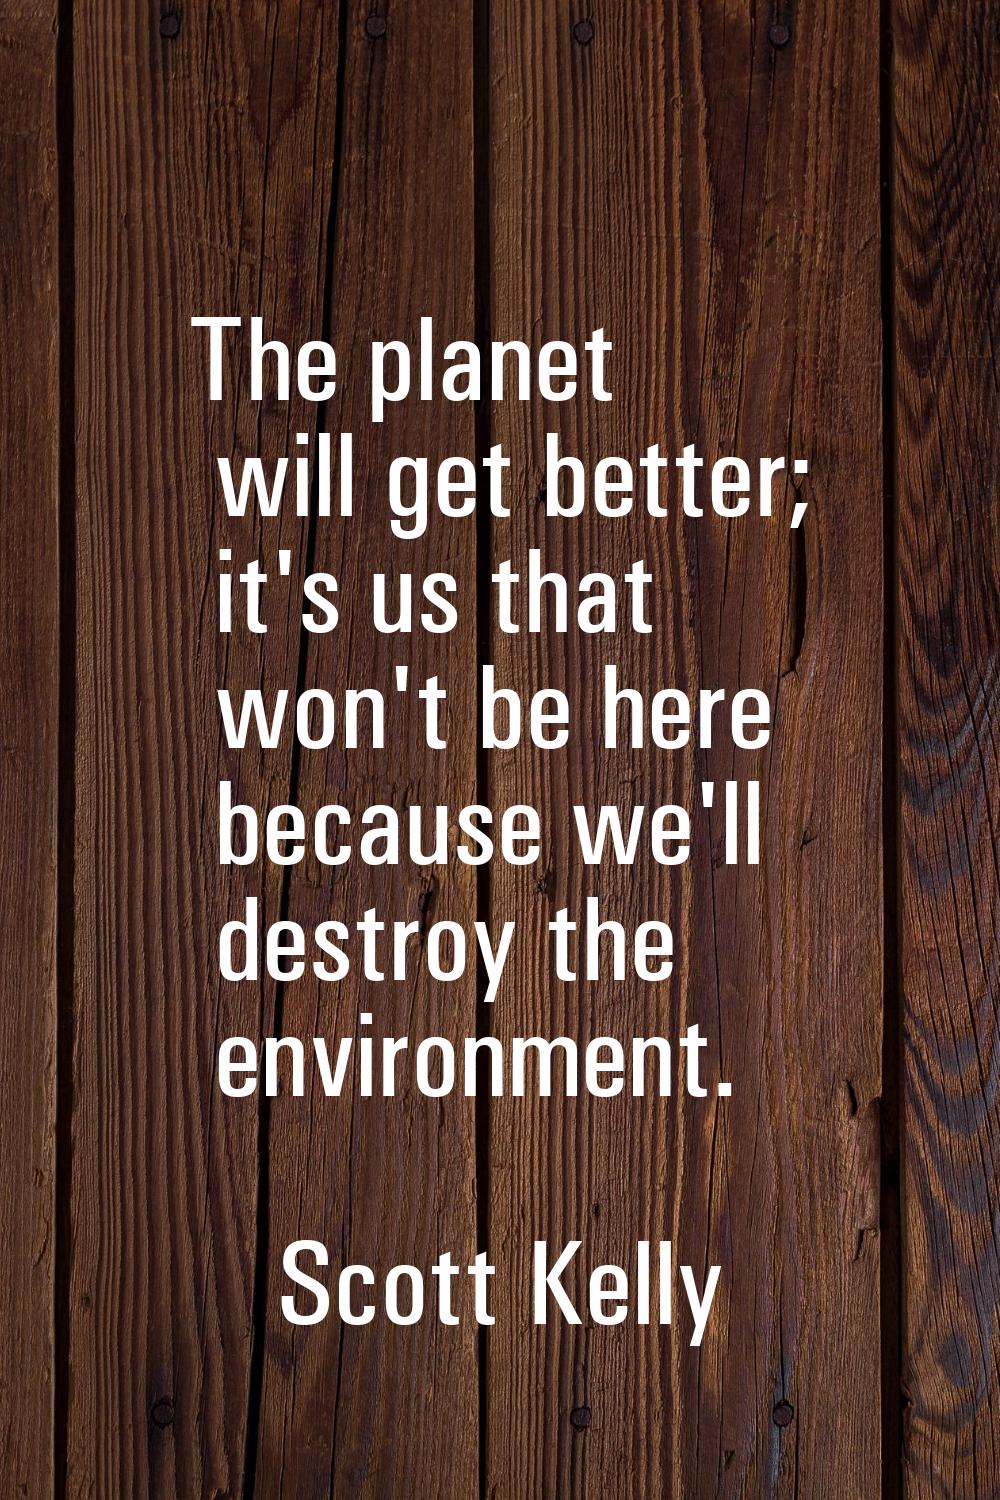 The planet will get better; it's us that won't be here because we'll destroy the environment.